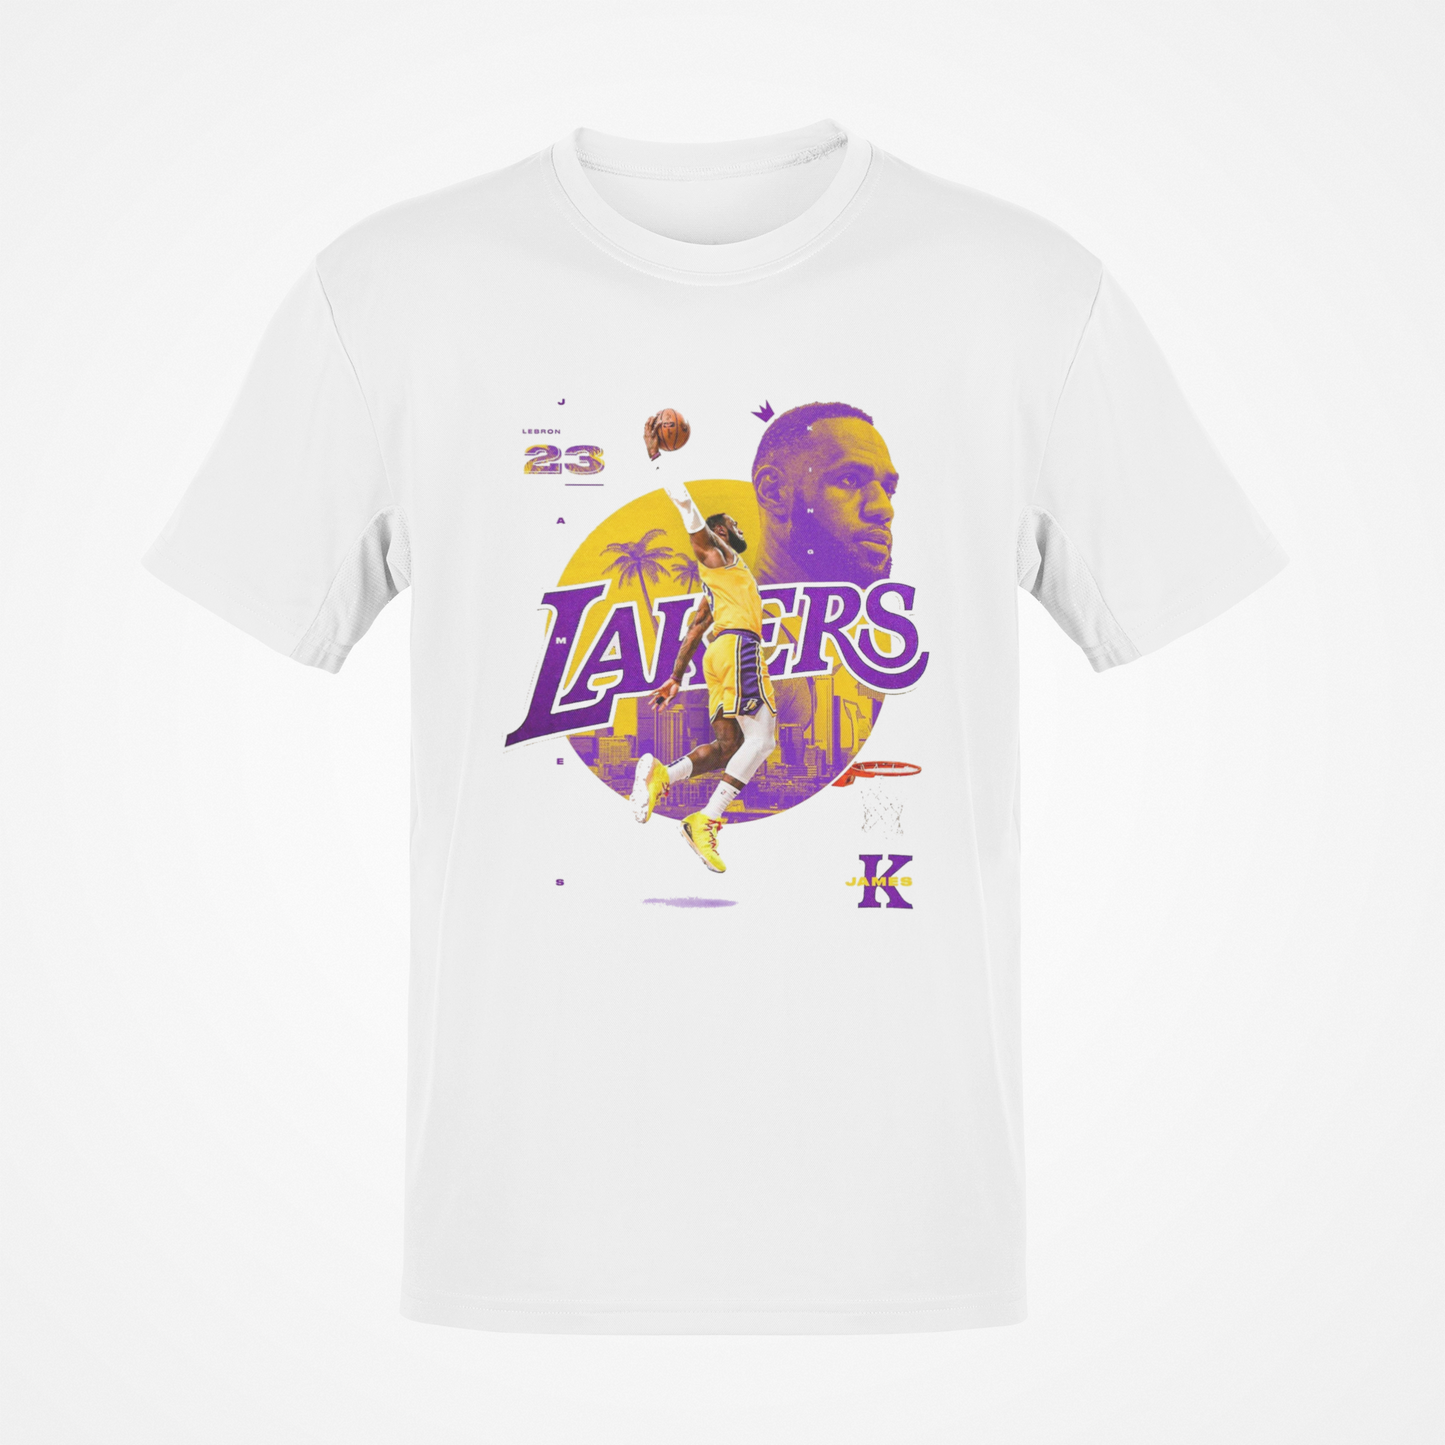 Lebron James "Lakers 23" Graphic